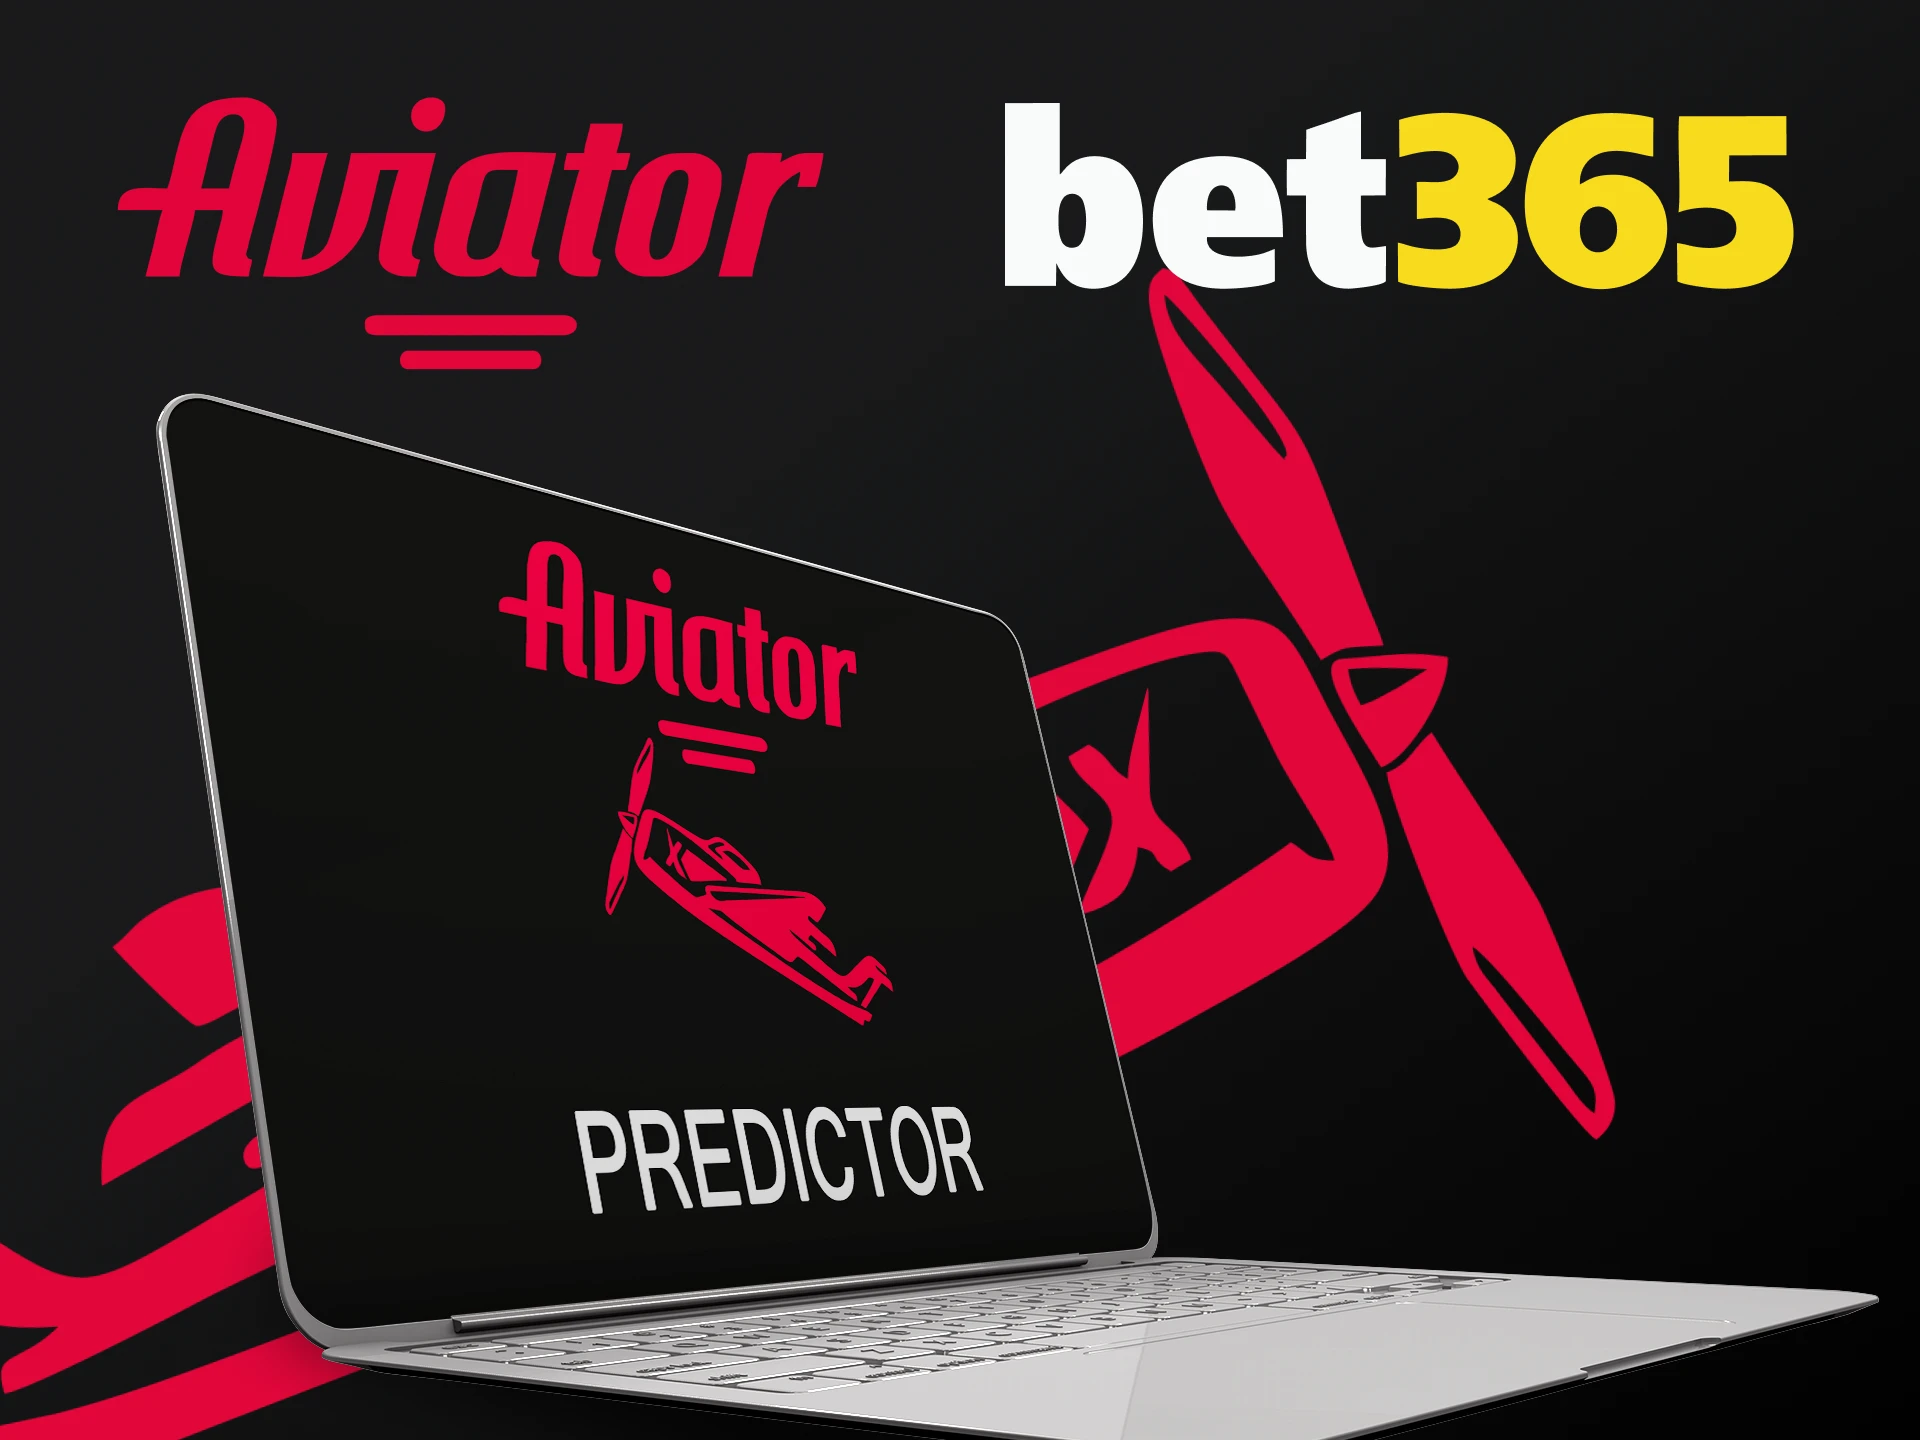 We will talk about Predictor for Bet365.